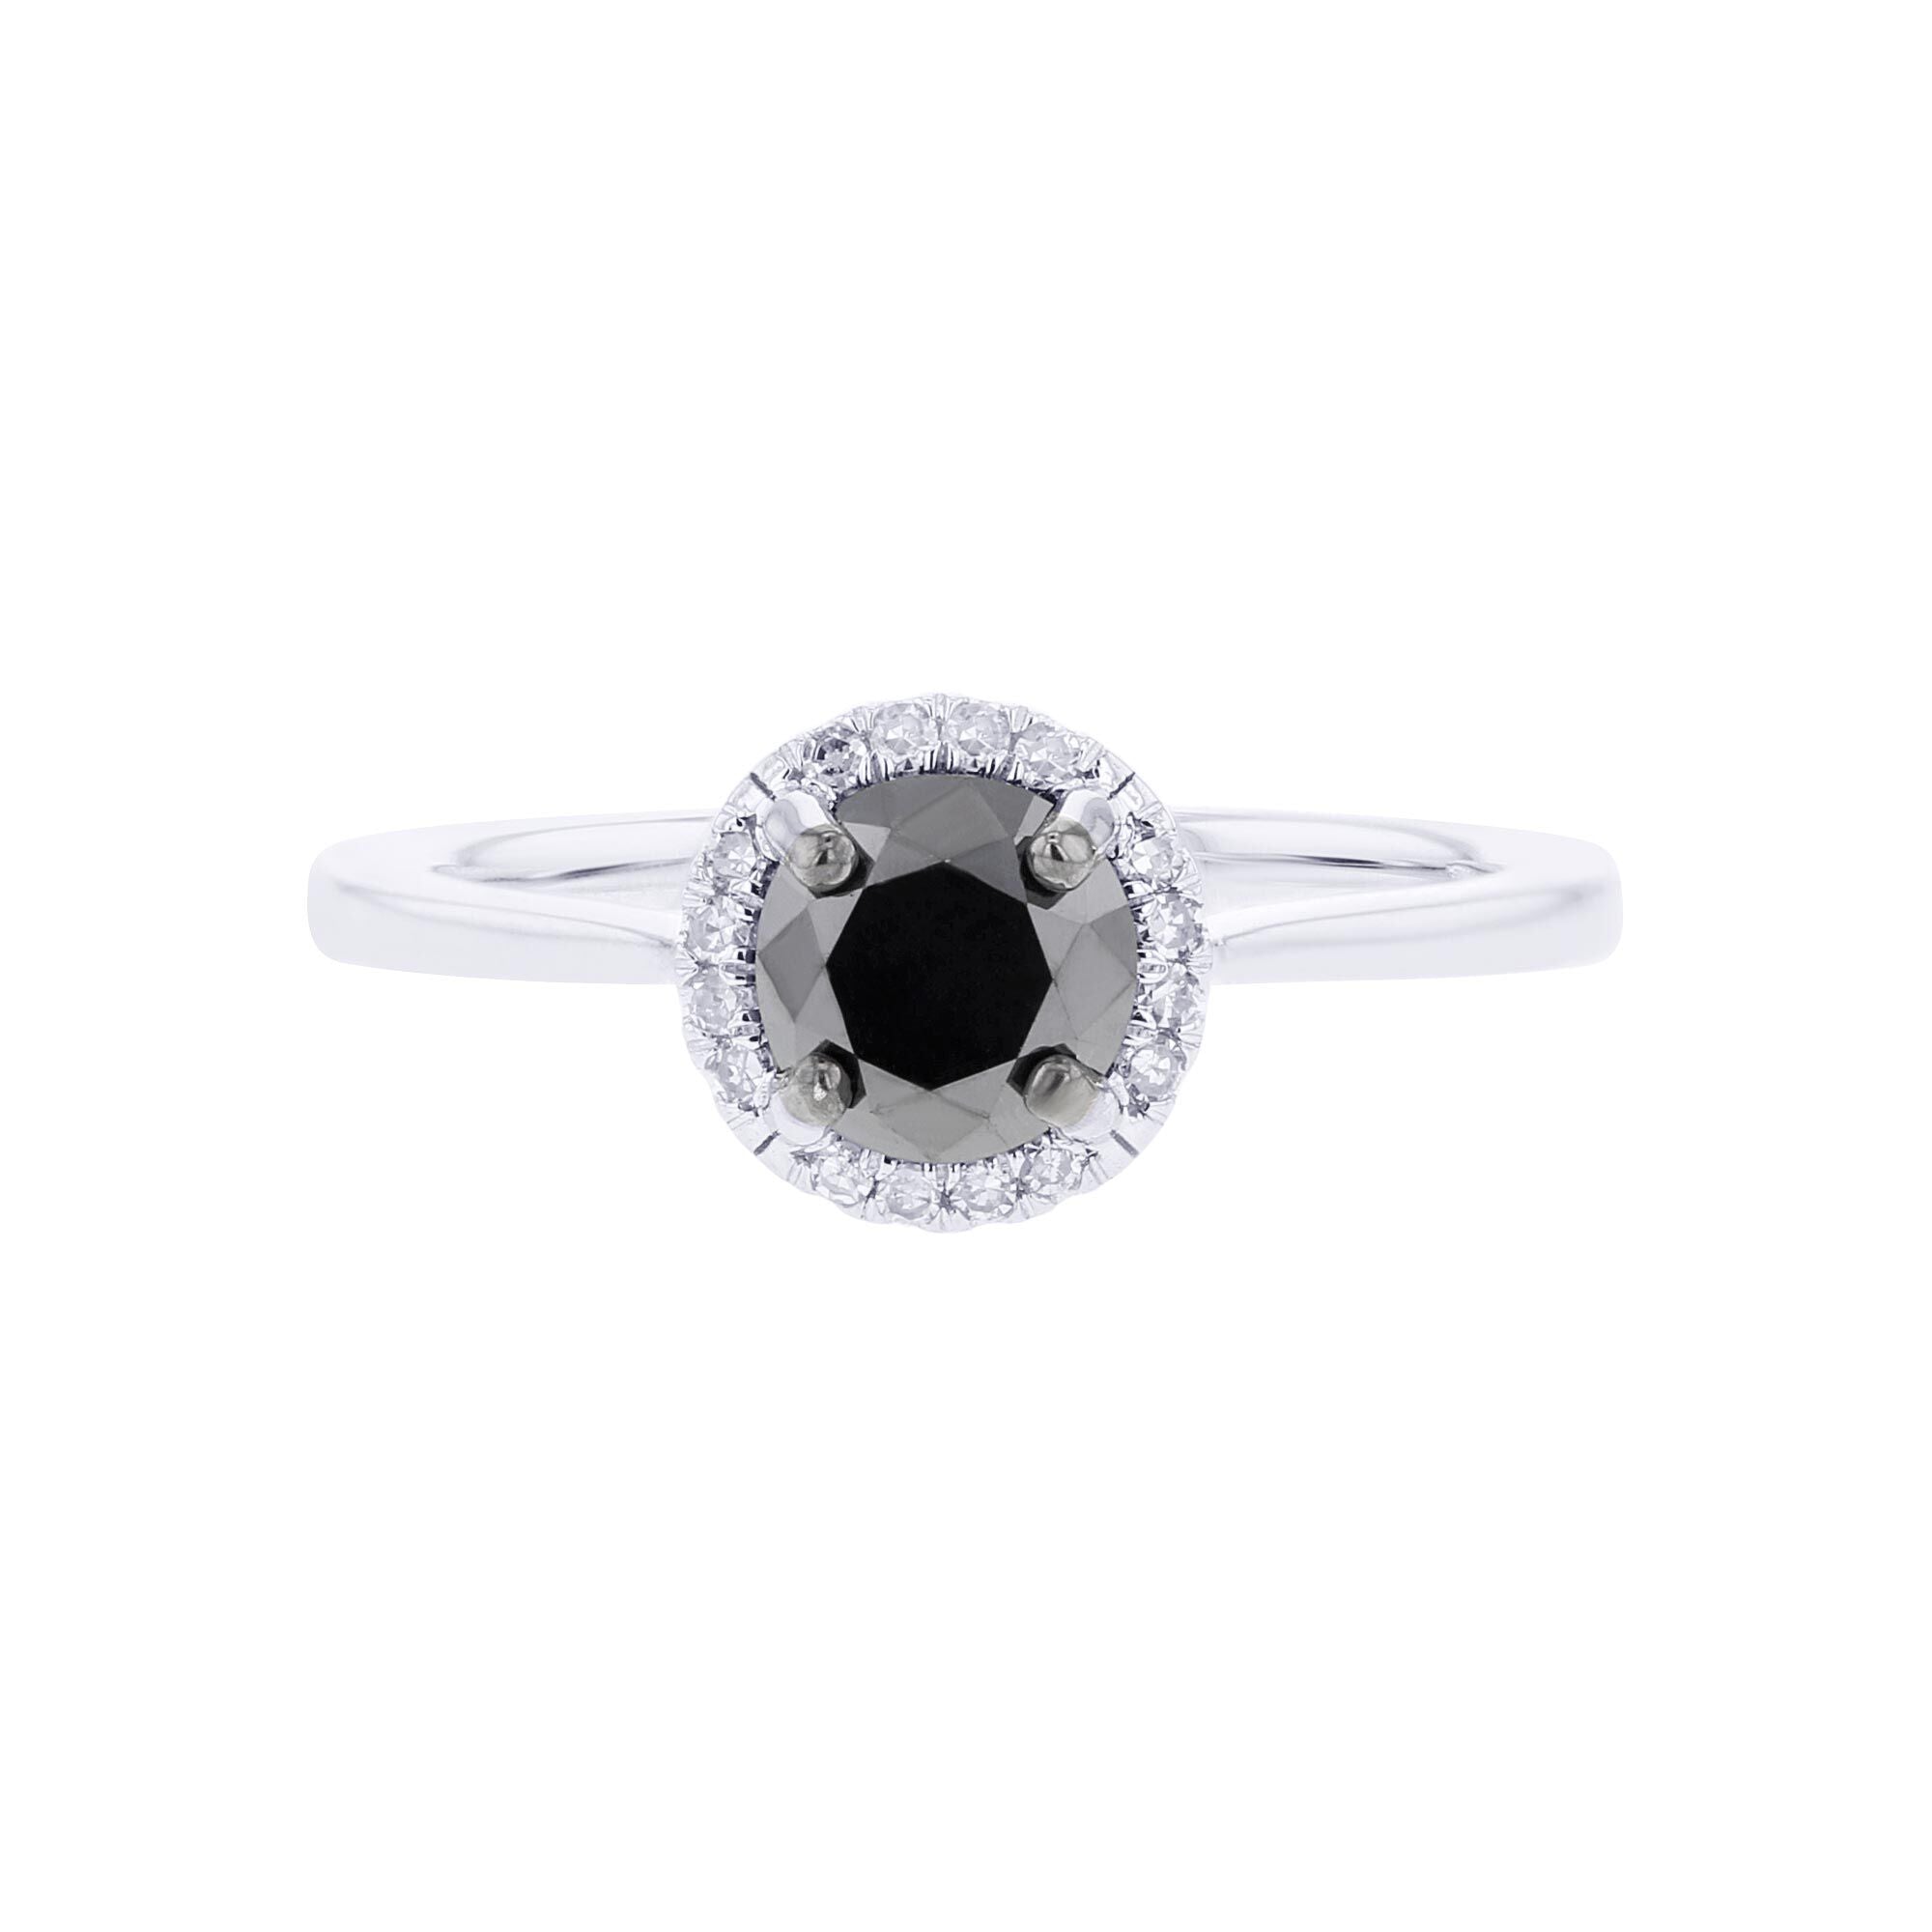 Morticia Ready for Love Diamond Engagement Ring 1ct